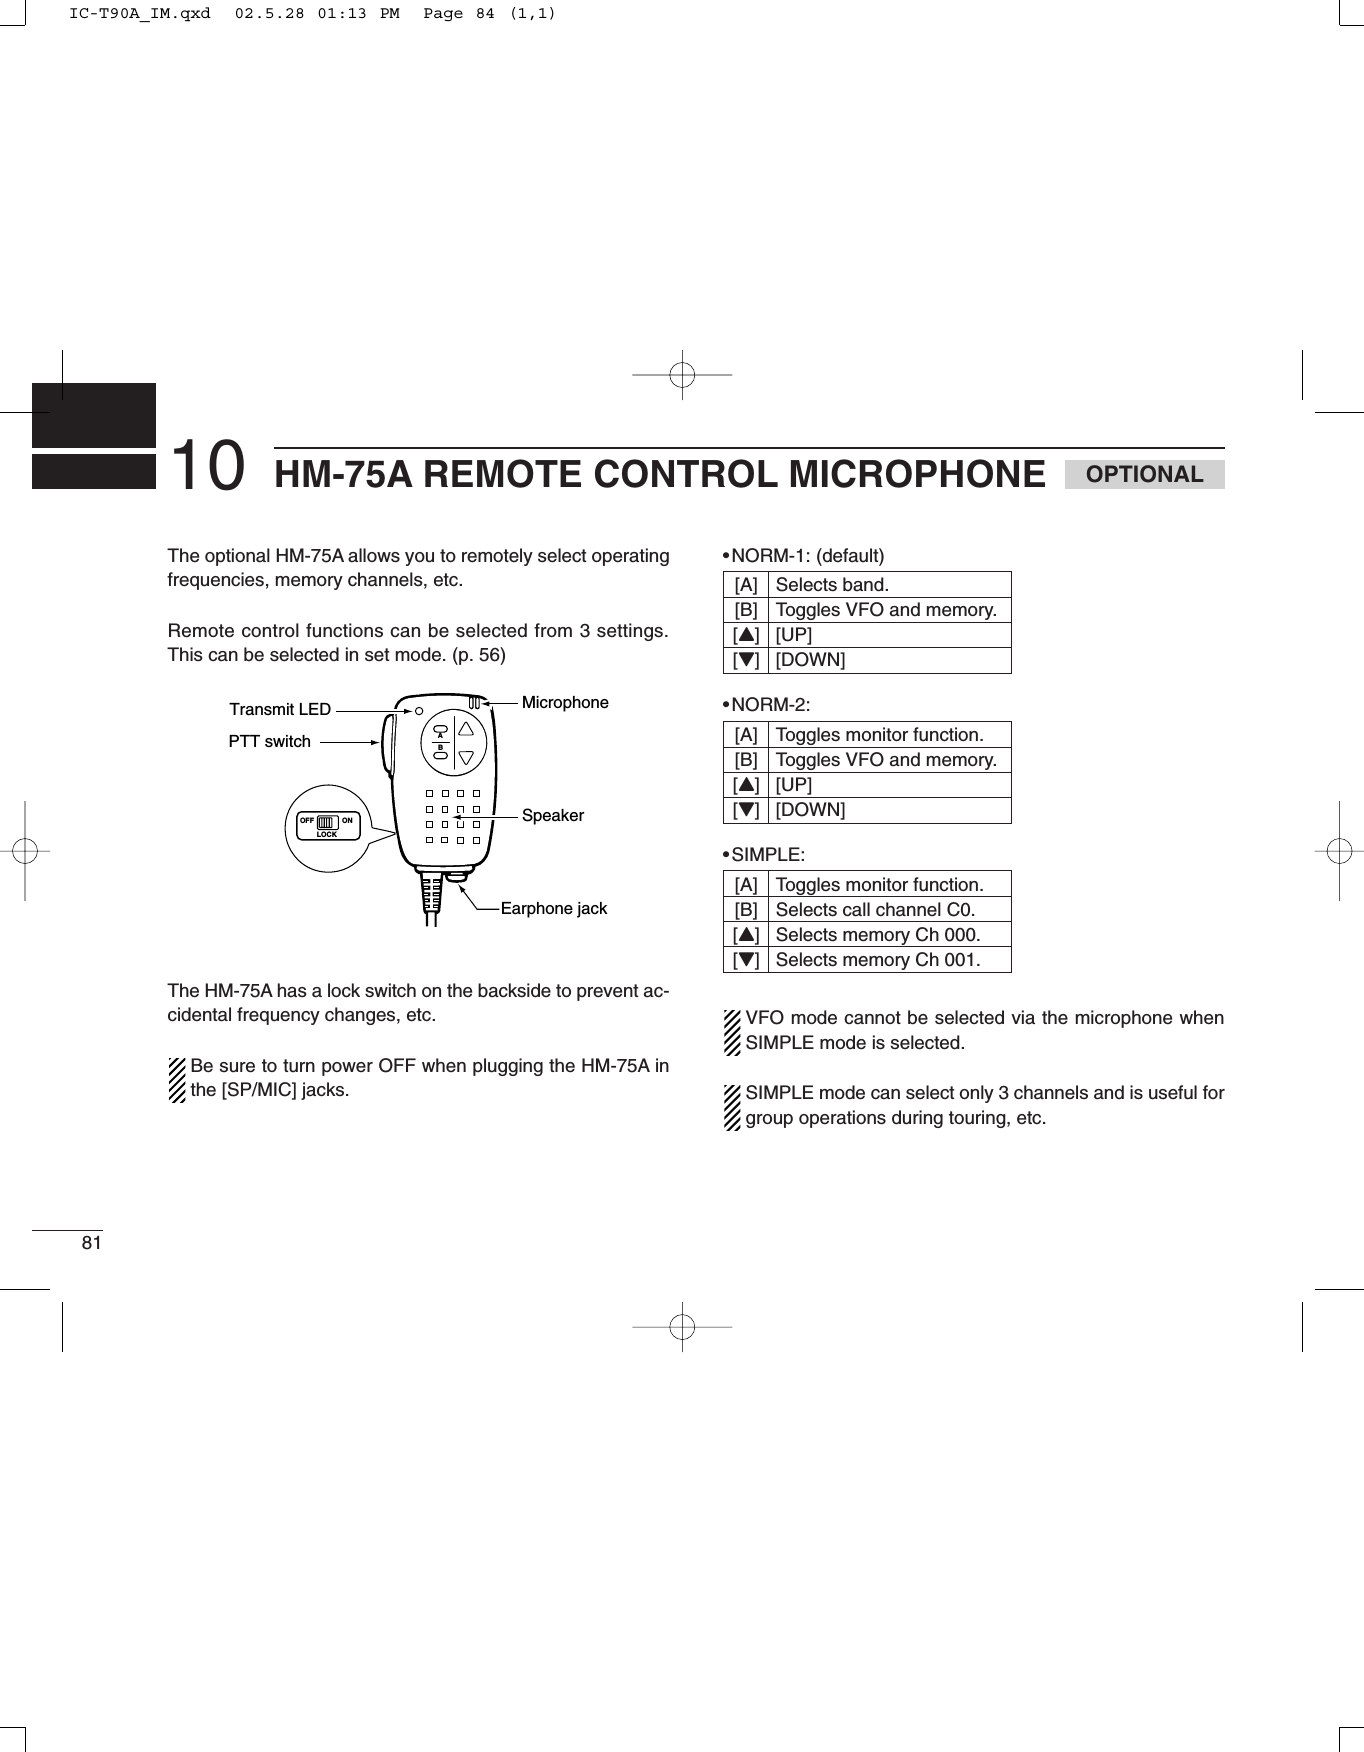 8110 HM-75A REMOTE CONTROL MICROPHONEThe optional HM-75A allows you to remotely select operatingfrequencies, memory channels, etc. Remote control functions can be selected from 3 settings.This can be selected in set mode. (p. 56)The HM-75A has a lock switch on the backside to prevent ac-cidental frequency changes, etc.Be sure to turn power OFF when plugging the HM-75A inthe [SP/MIC] jacks.•NORM-1: (default)[A] Selects band.[B] Toggles VFO and memory.[Y] [UP][Z] [DOWN]•NORM-2: [A] Toggles monitor function.[B] Toggles VFO and memory.[Y] [UP][Z] [DOWN]•SIMPLE: [A] Toggles monitor function.[B] Selects call channel C0.[Y] Selects memory Ch 000.[Z] Selects memory Ch 001.VFO mode cannot be selected via the microphone whenSIMPLE mode is selected.SIMPLE mode can select only 3 channels and is useful forgroup operations during touring, etc.AOFF ONLOCKBPTT switchTransmit LEDEarphone jackMicrophoneSpeakerOPTIONALIC-T90A_IM.qxd  02.5.28 01:13 PM  Page 84 (1,1)